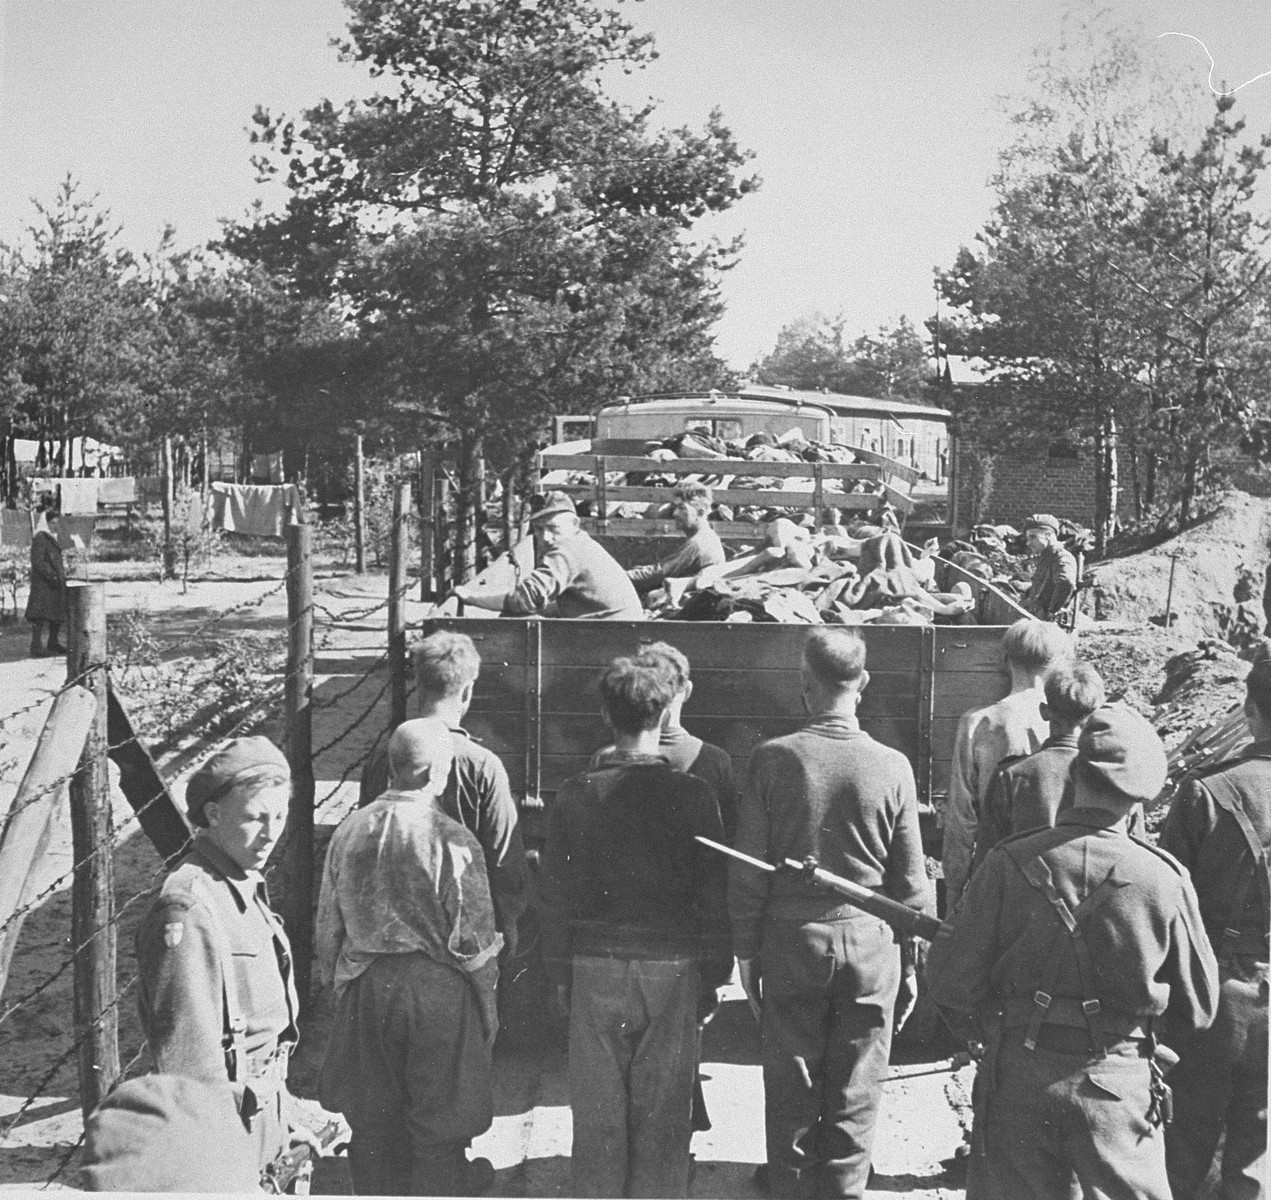 British soldiers transport former SS guards and truckloads of corpses to mass graves for burial.  

Former camp doctor Fritz Klein can be seen seated in the back of the lorry.